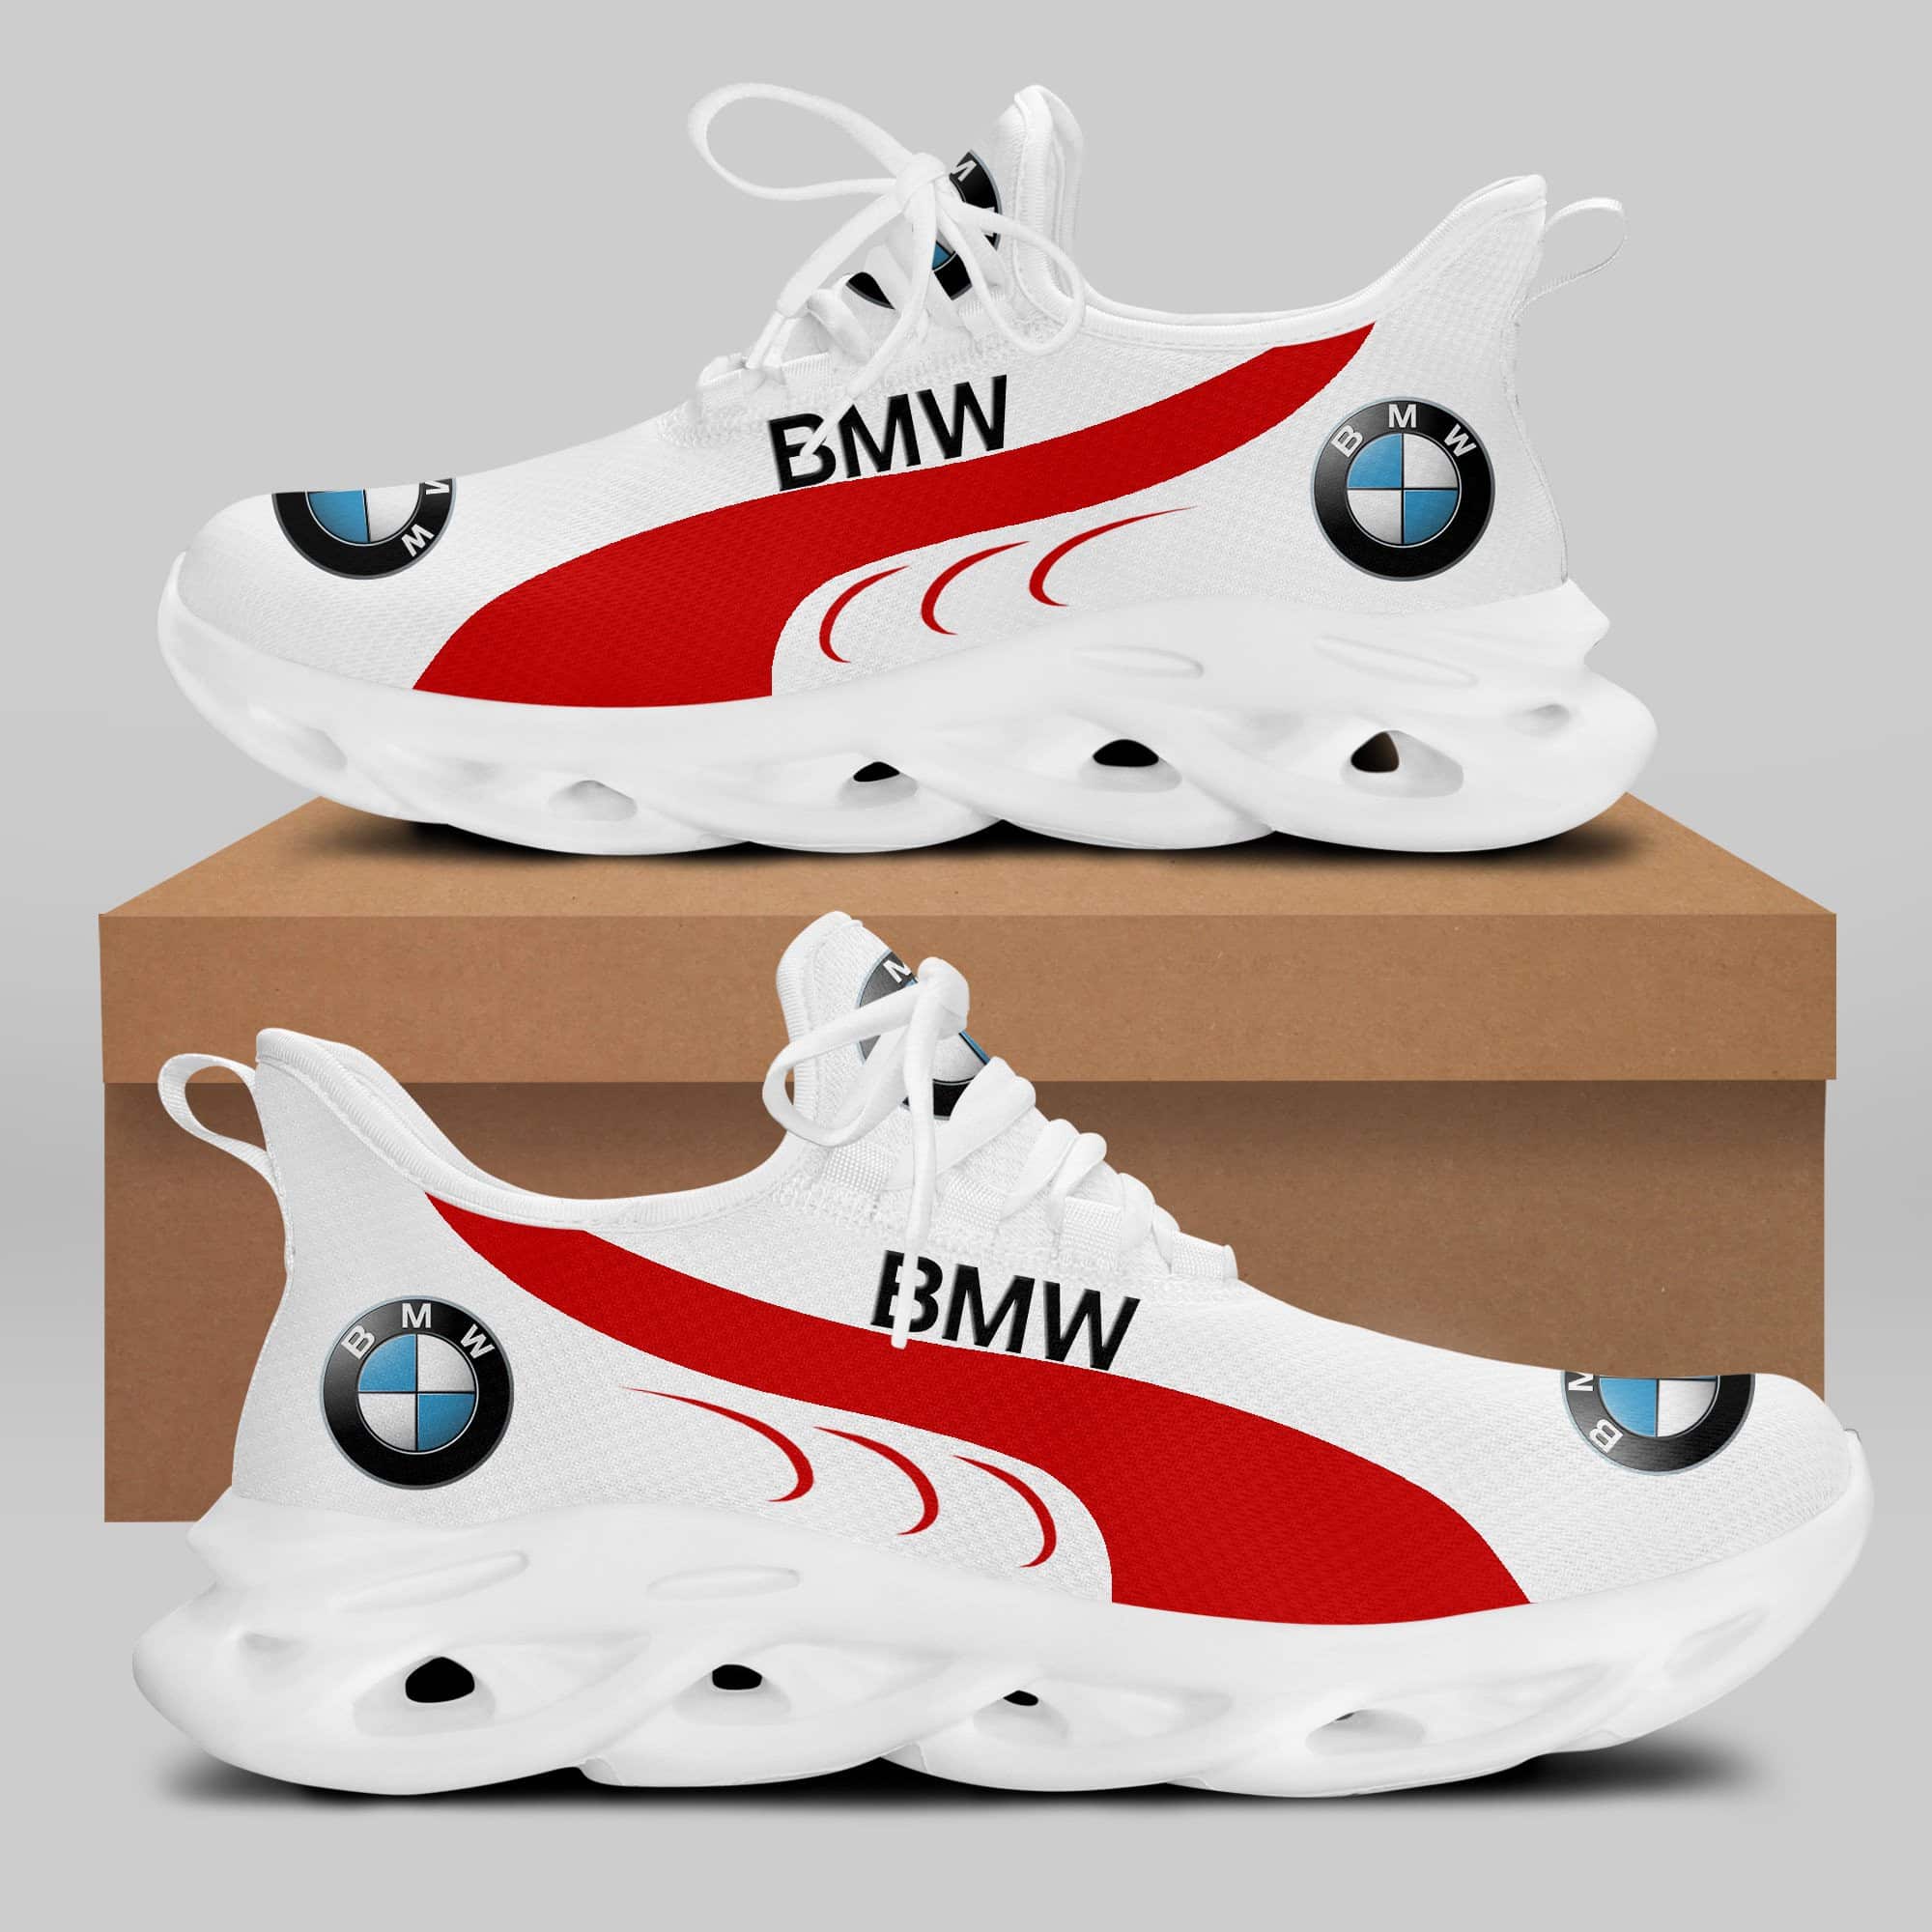 Bmw Running Shoes Max Soul Shoes Sneakers Ver 55 1